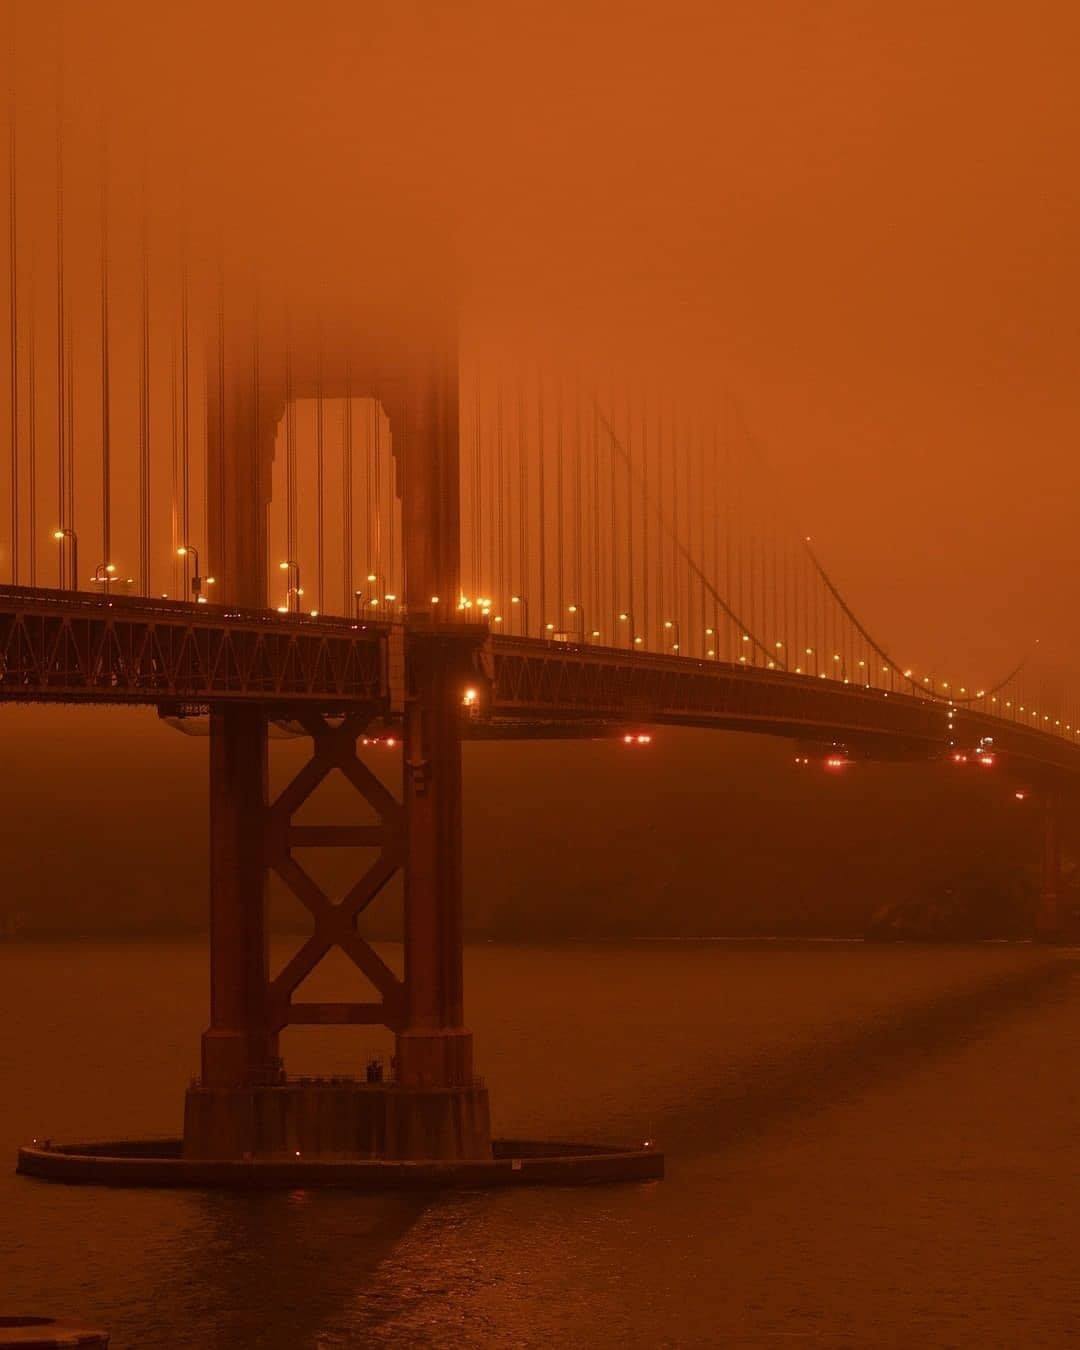 Poor air quality in San Francisco due to forest fires.